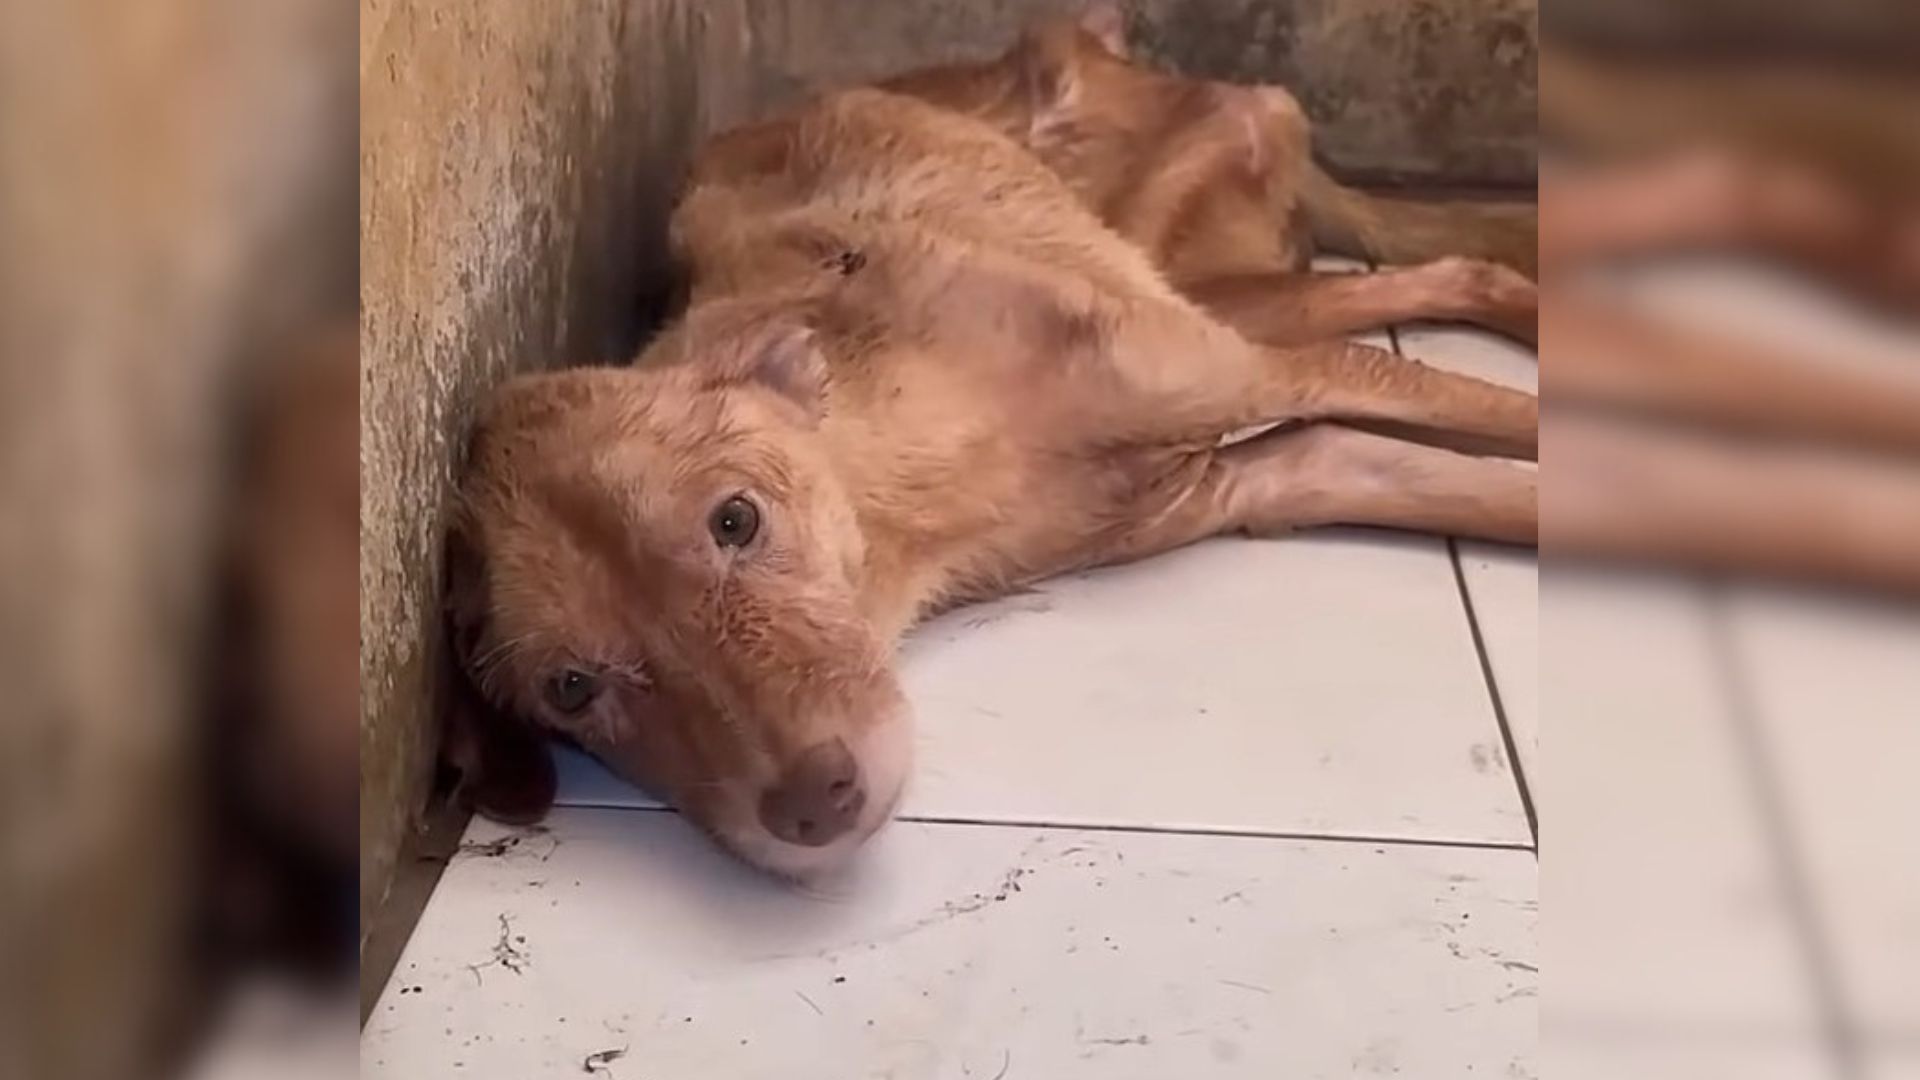 Homeowner Bought A New House Only To Find A Starving Dog There, Begging For Help